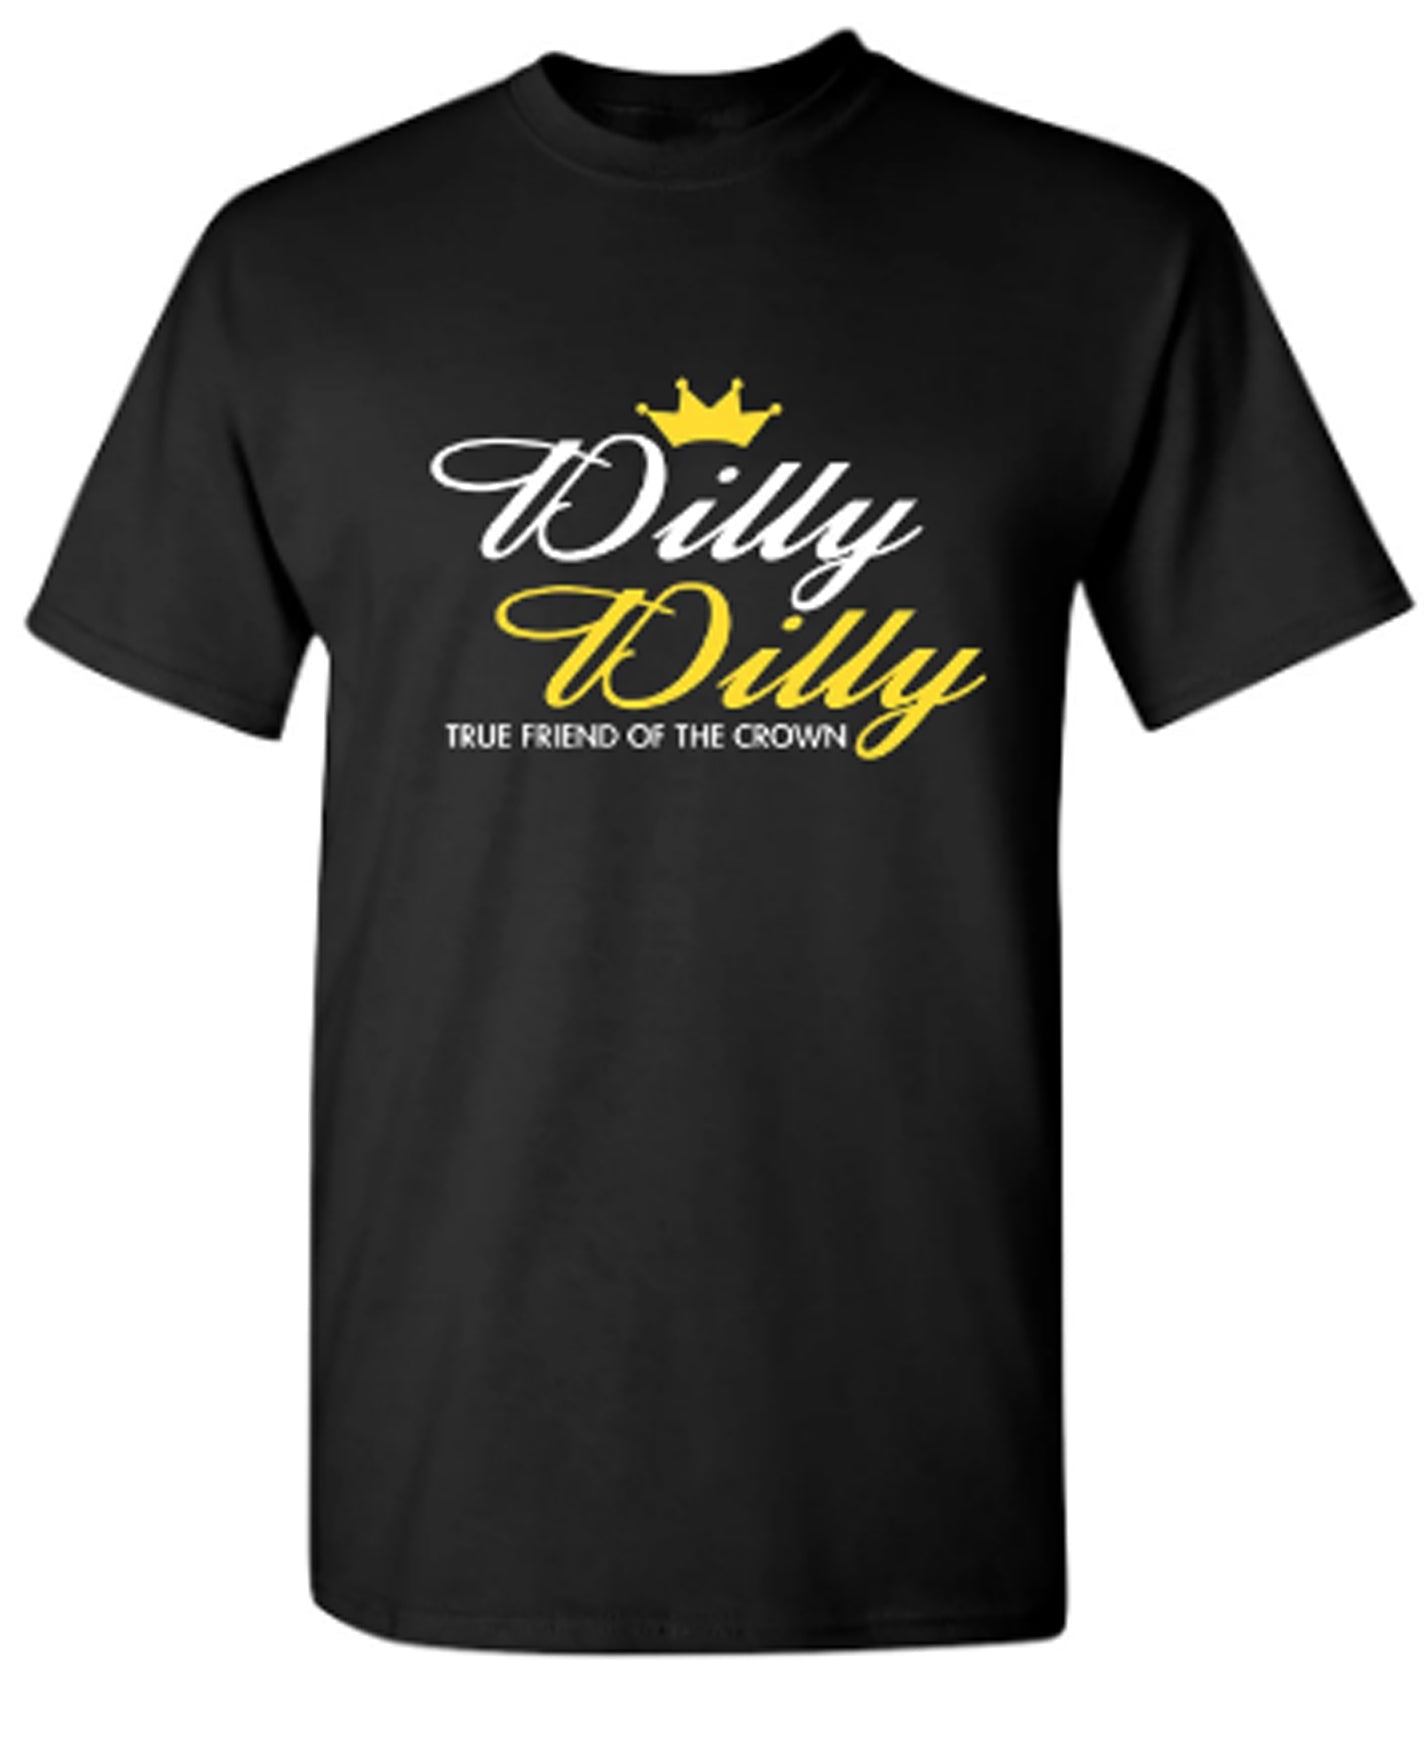 Dilly Dilly True Friend Of The Crown - Funny T Shirts & Graphic Tees